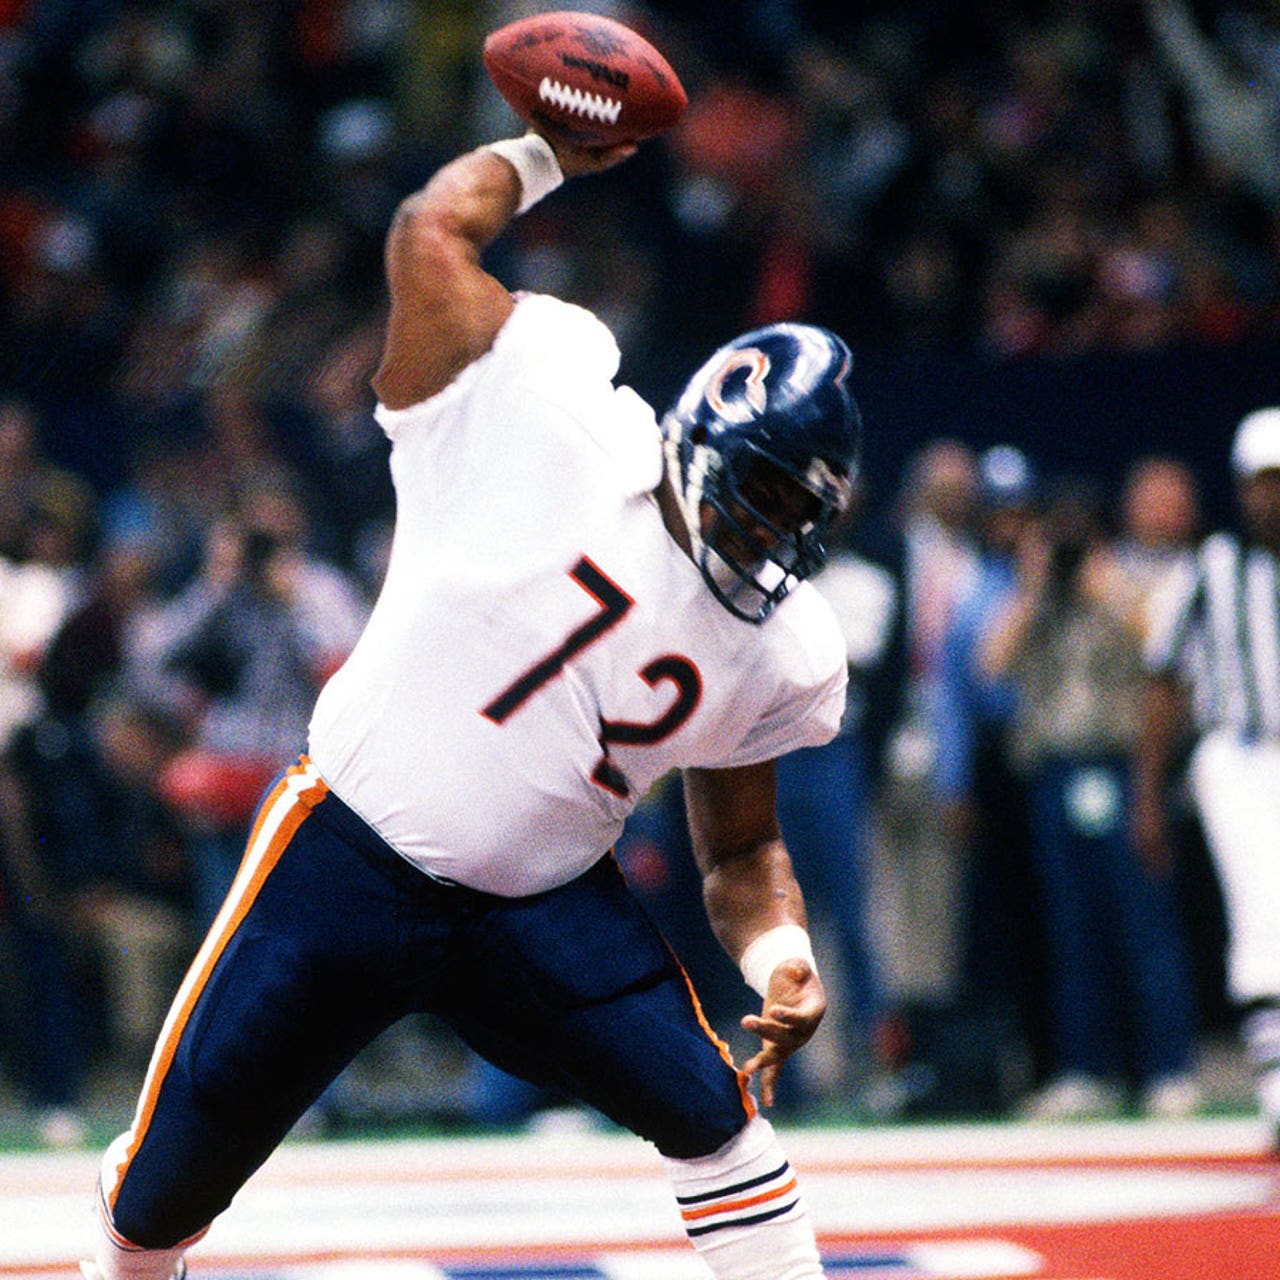 Throwback Thursday: Watch William 'Refrigerator' Perry during his